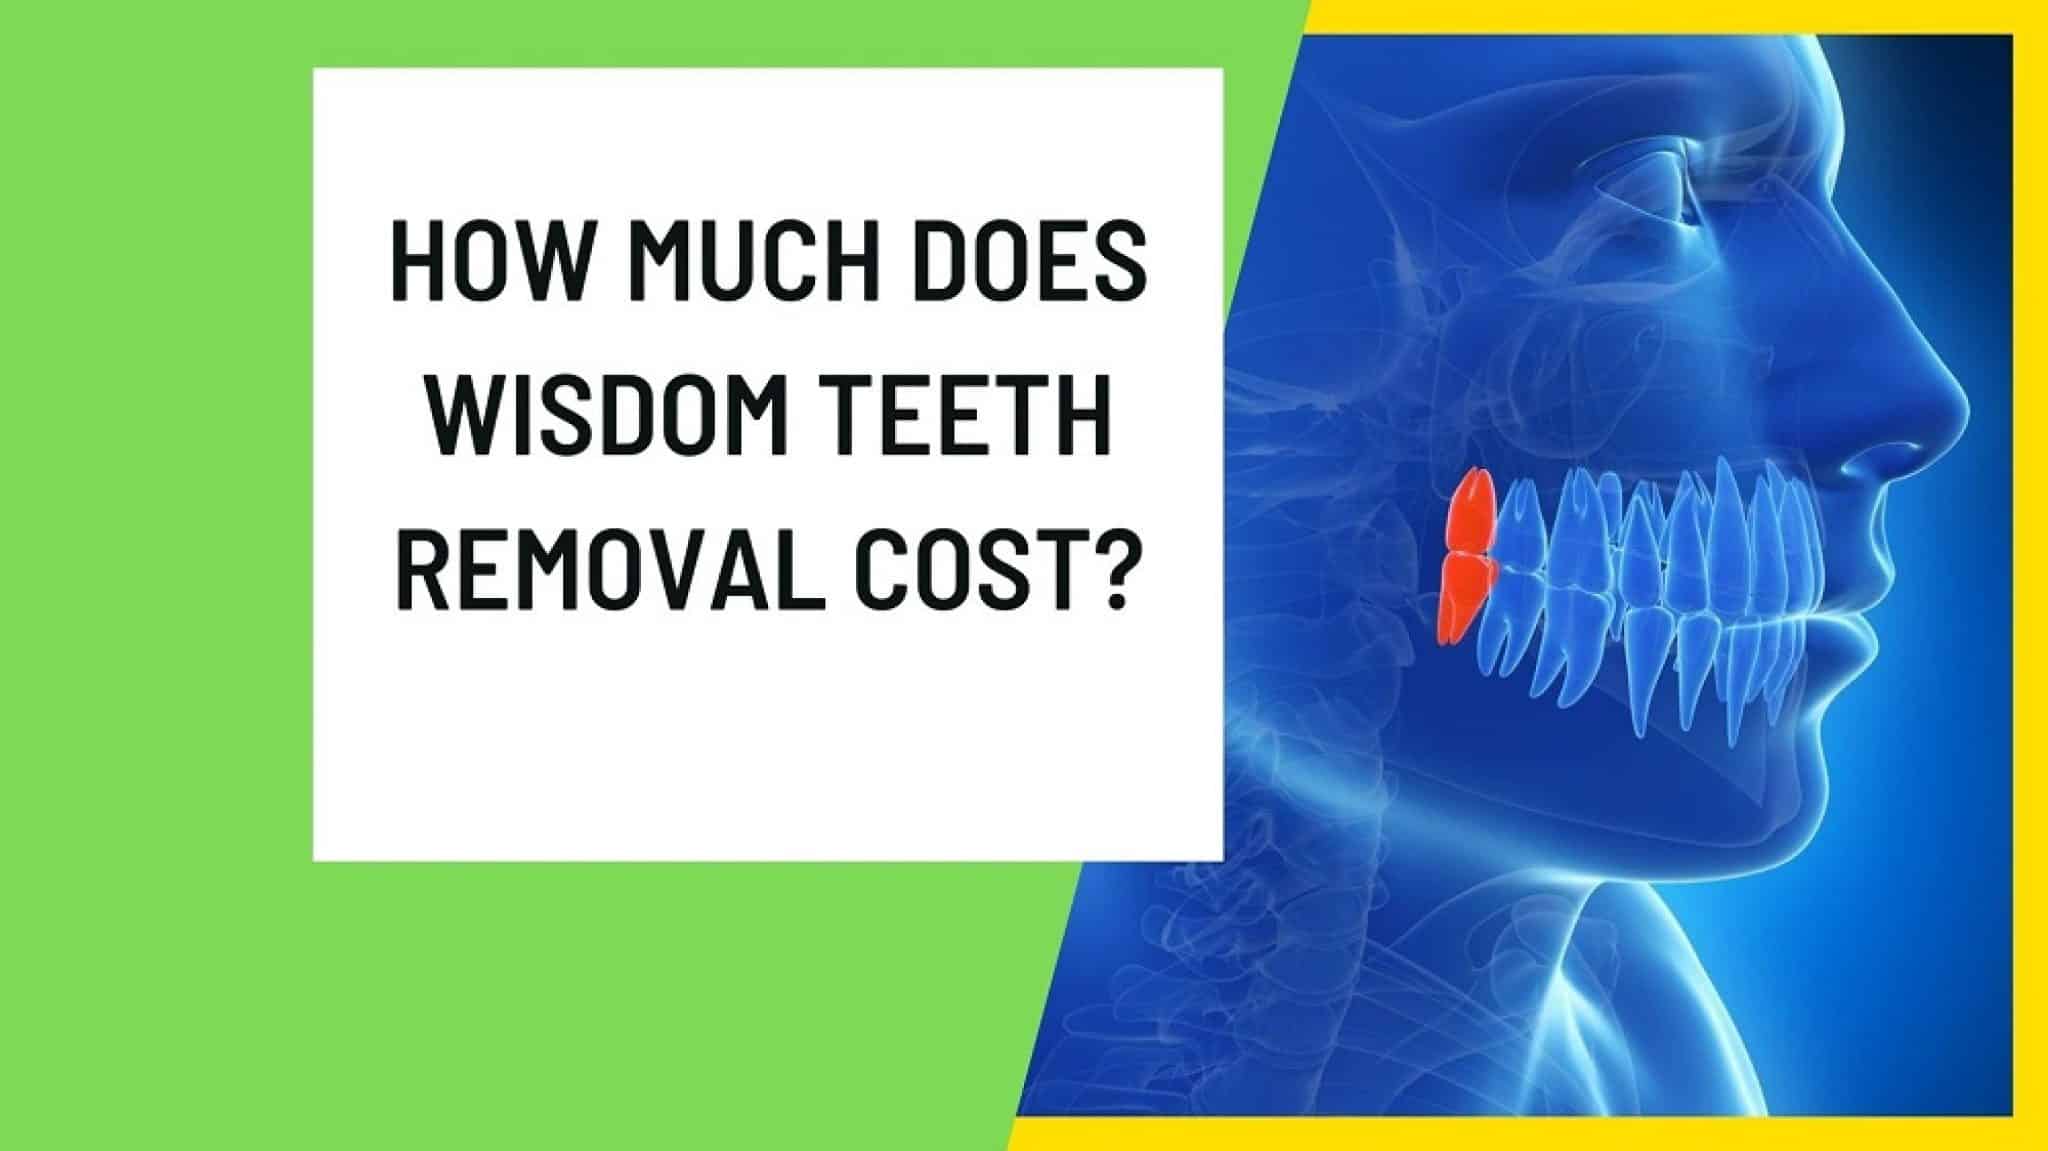 How Much Does Wisdom Teeth Removal Cost?